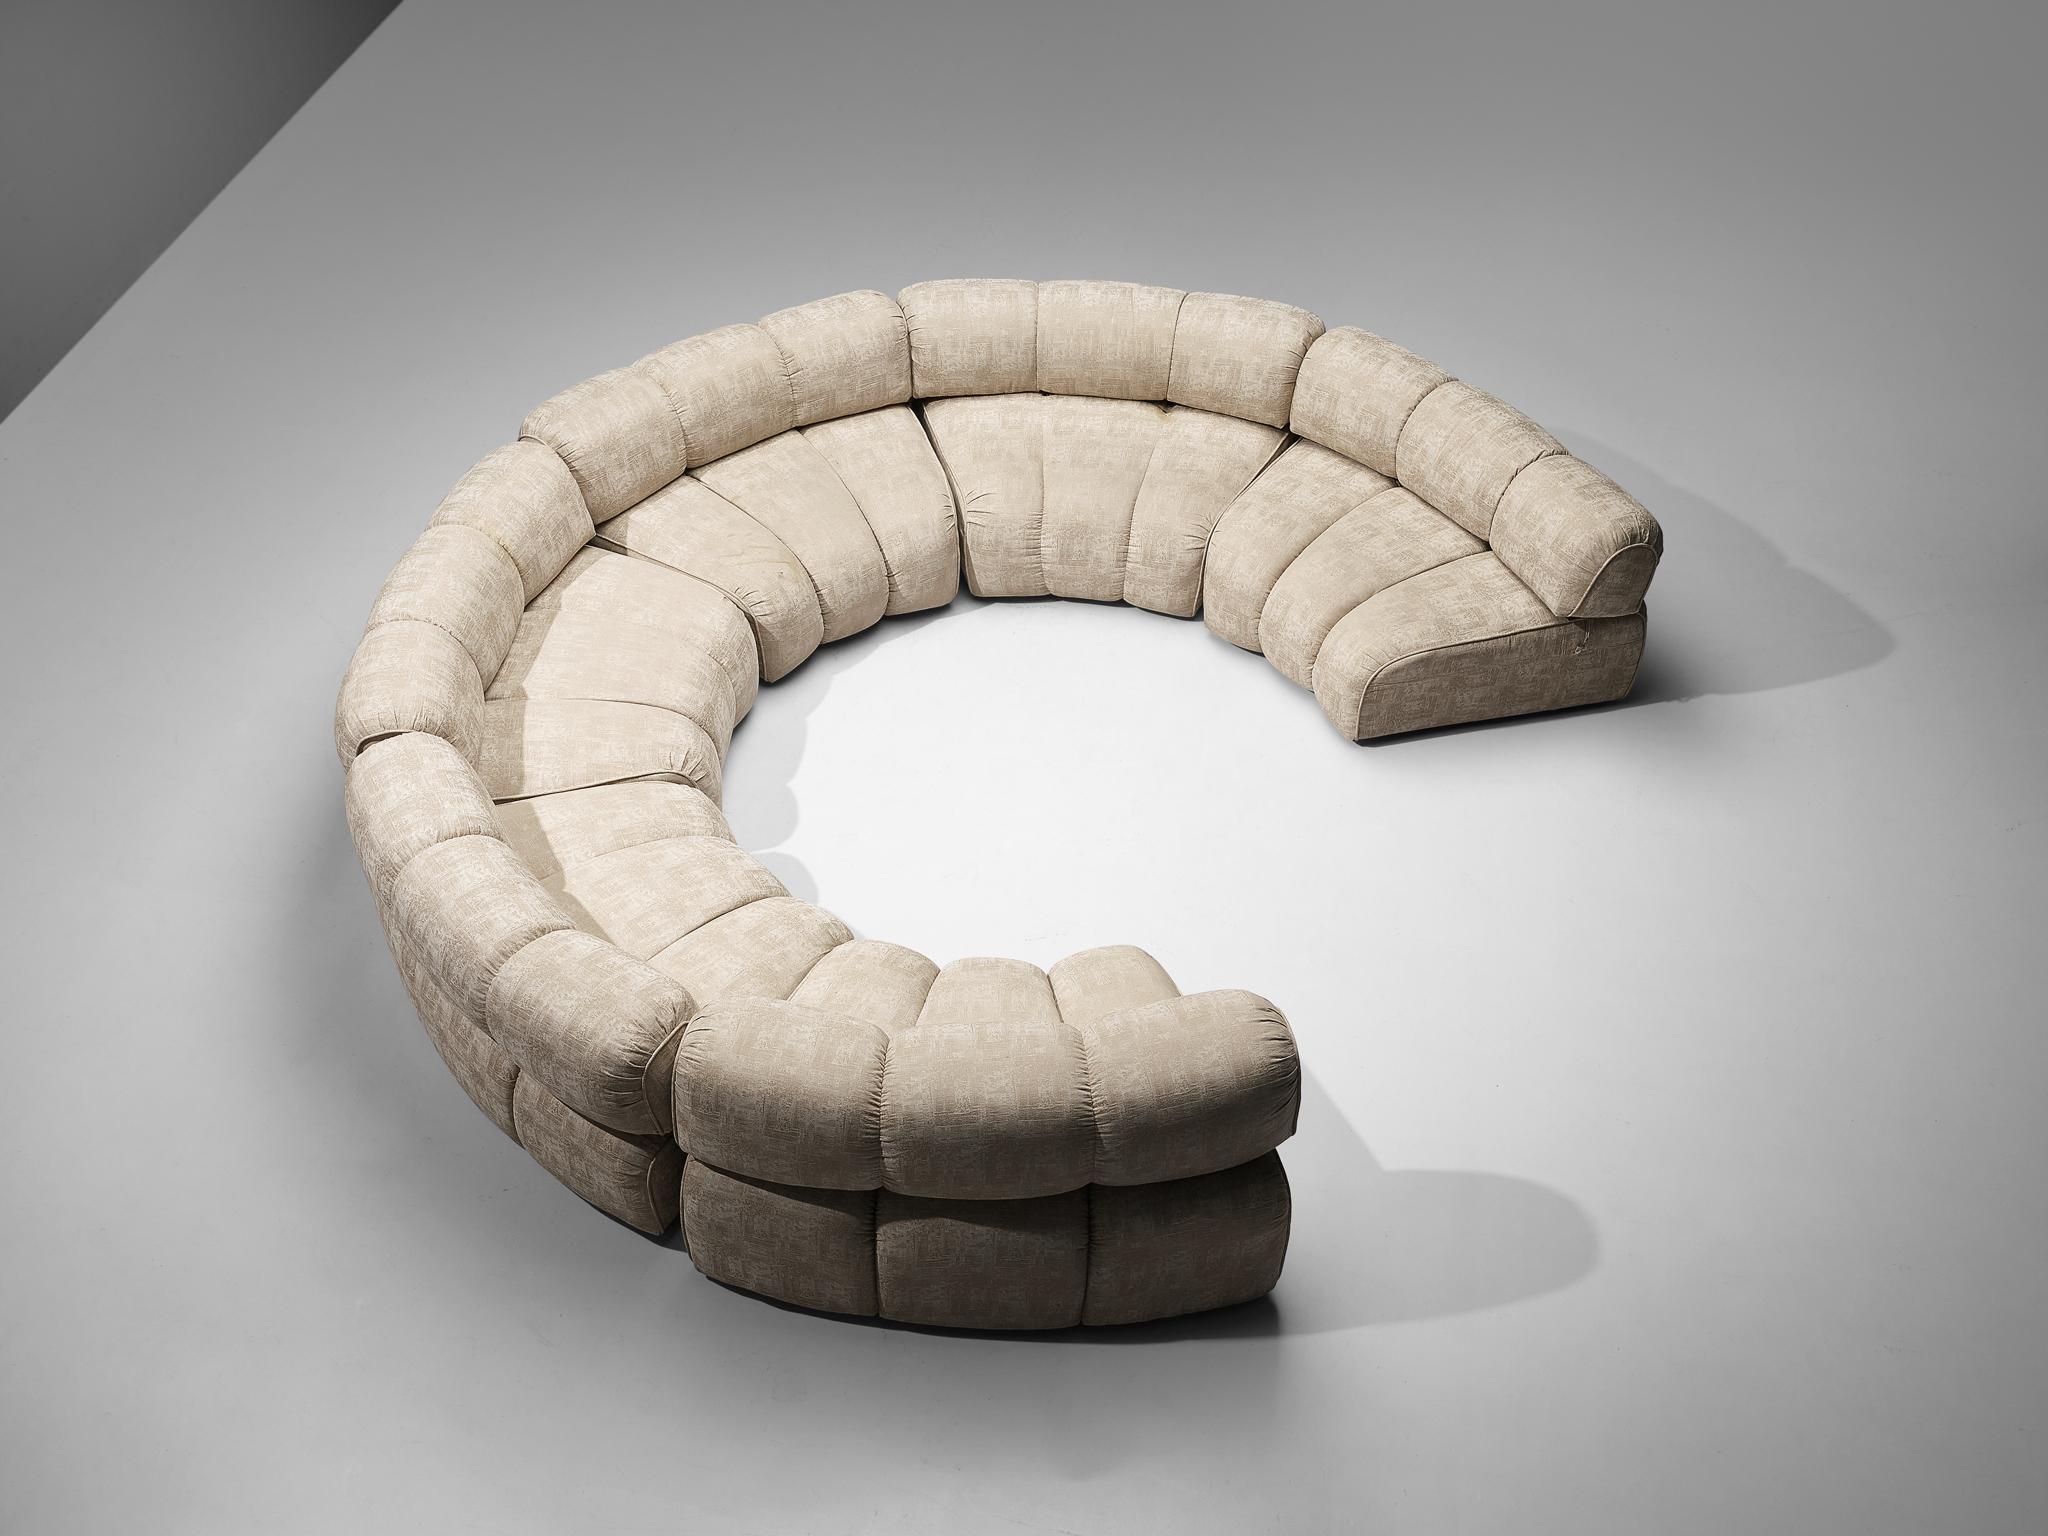 Modular sofa, fabric, Europe, 1970s. 

This grandiose characteristic sofa finds itself at the intersection of art and design. This design transcends the typical concept of the sofa by embodying artistic elements that refer to the ethos of the